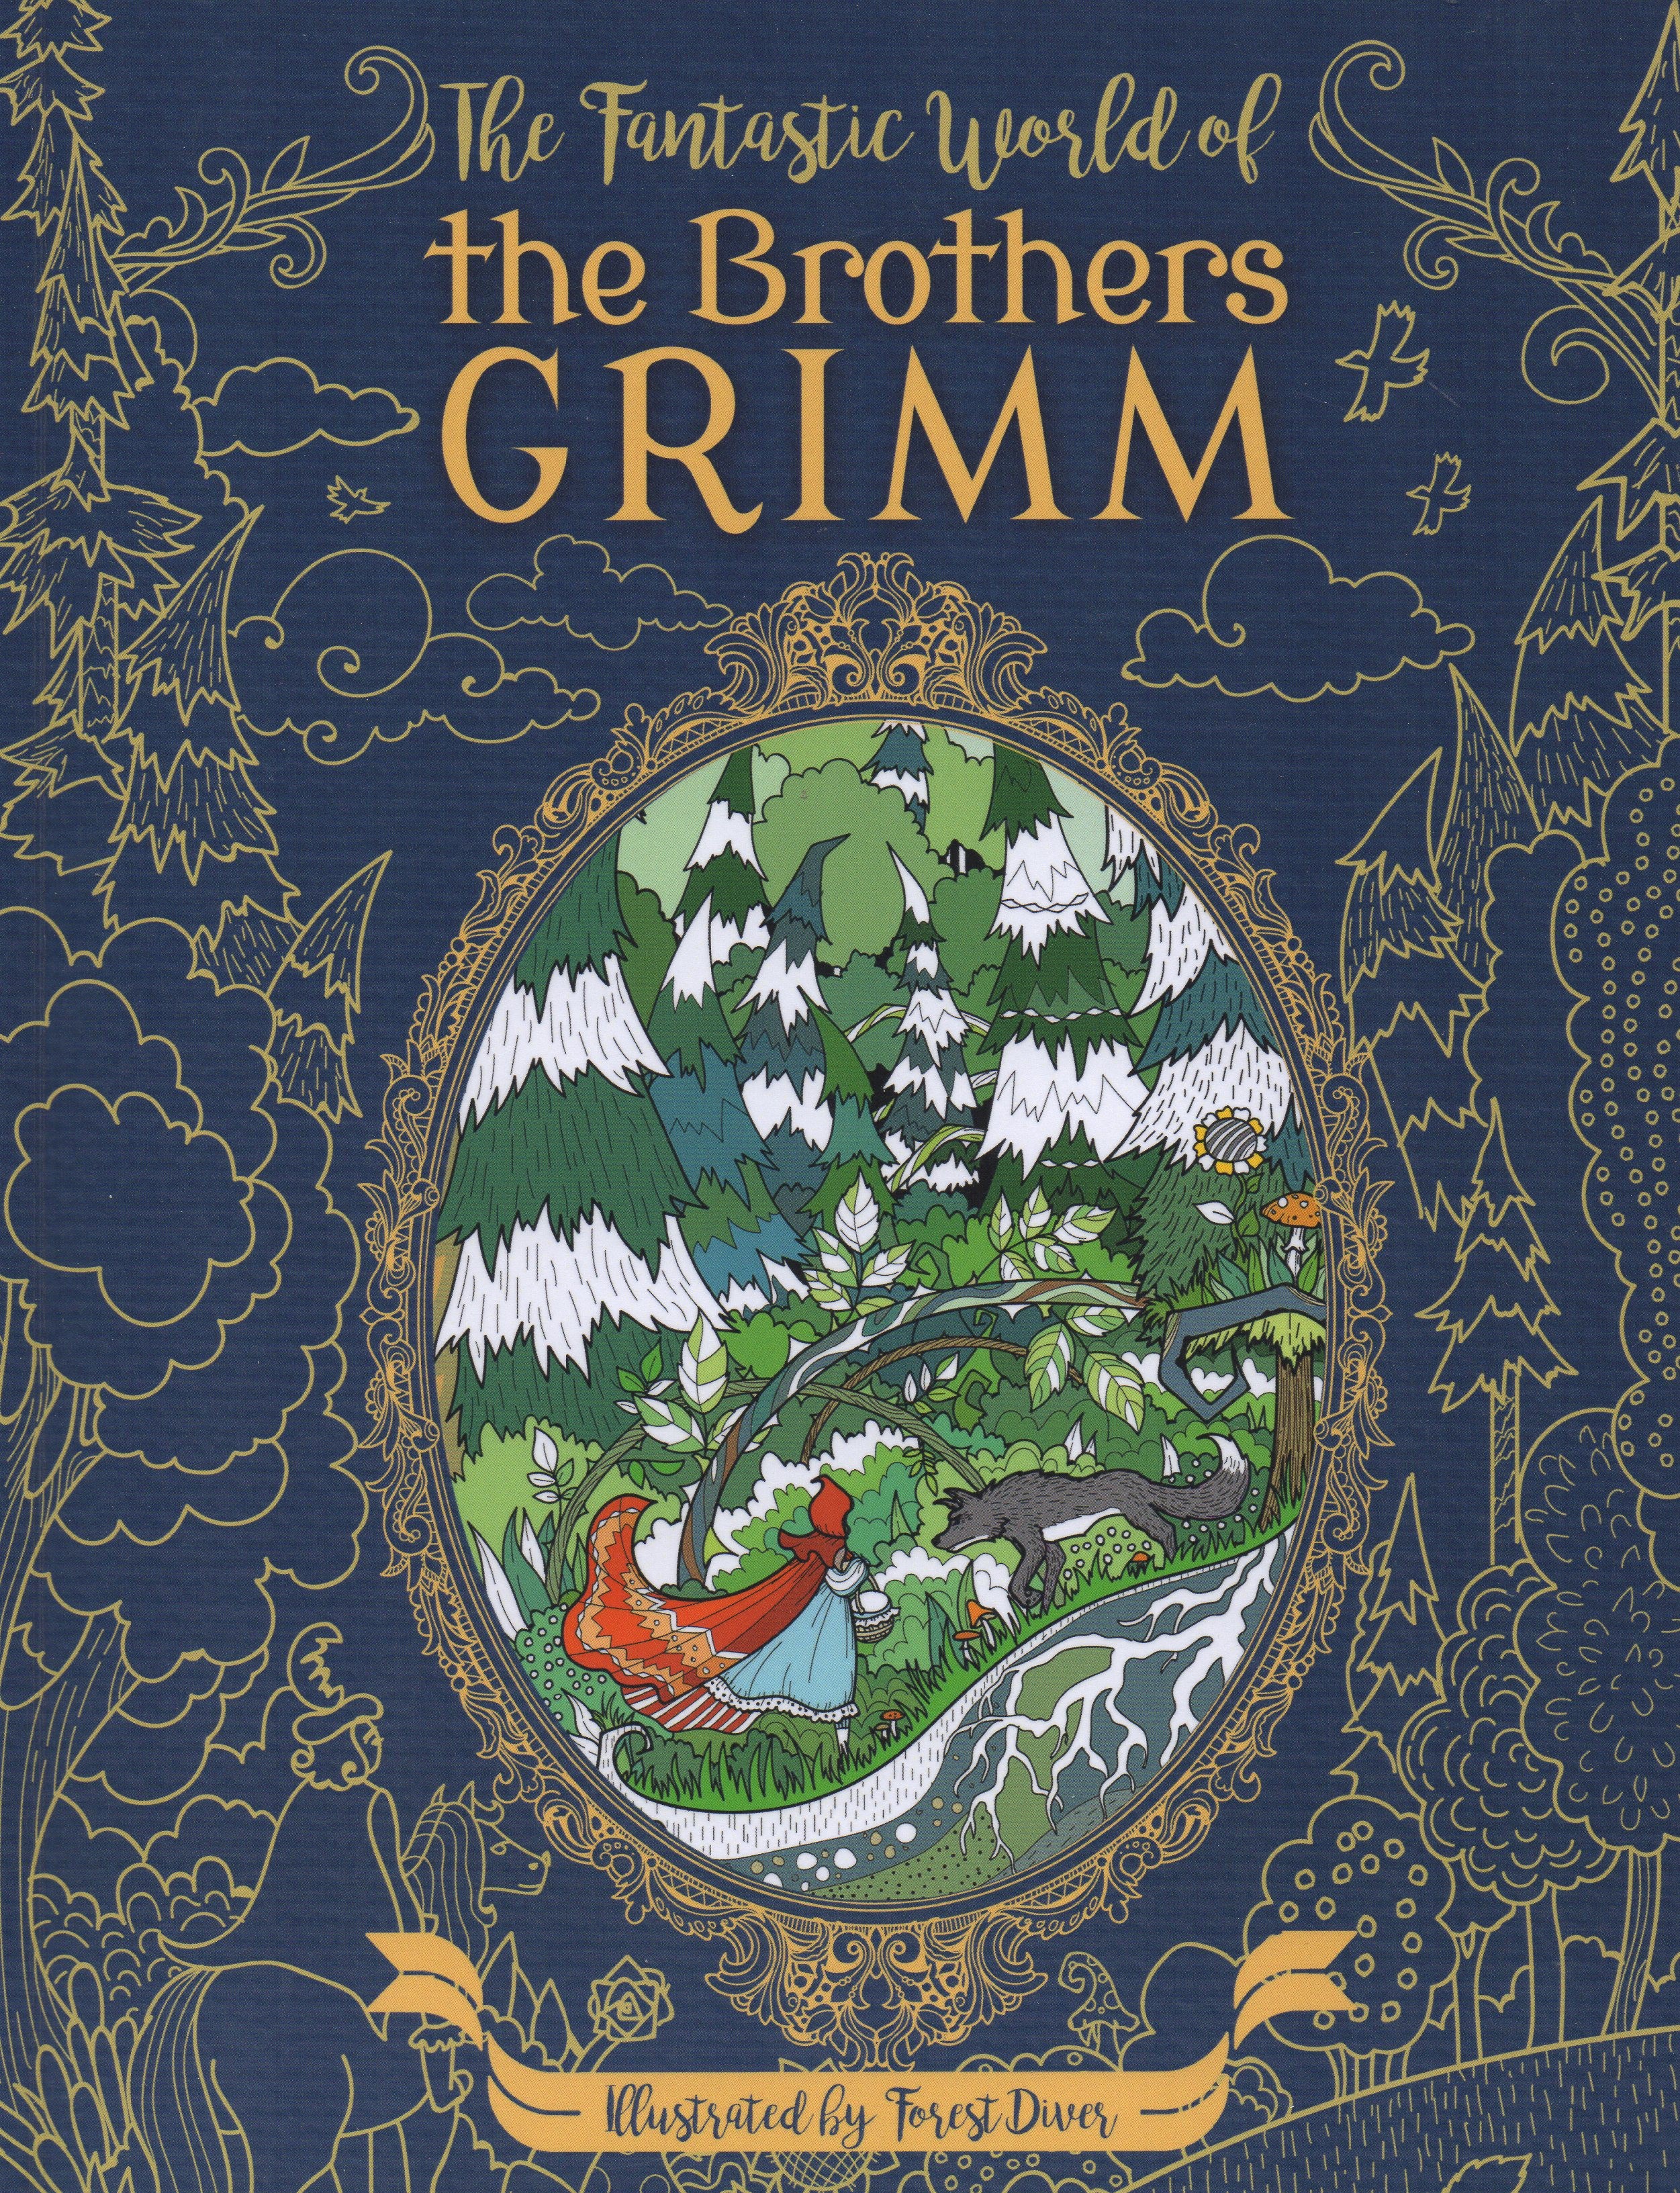 The Fantastic World of the Brothers Grimm